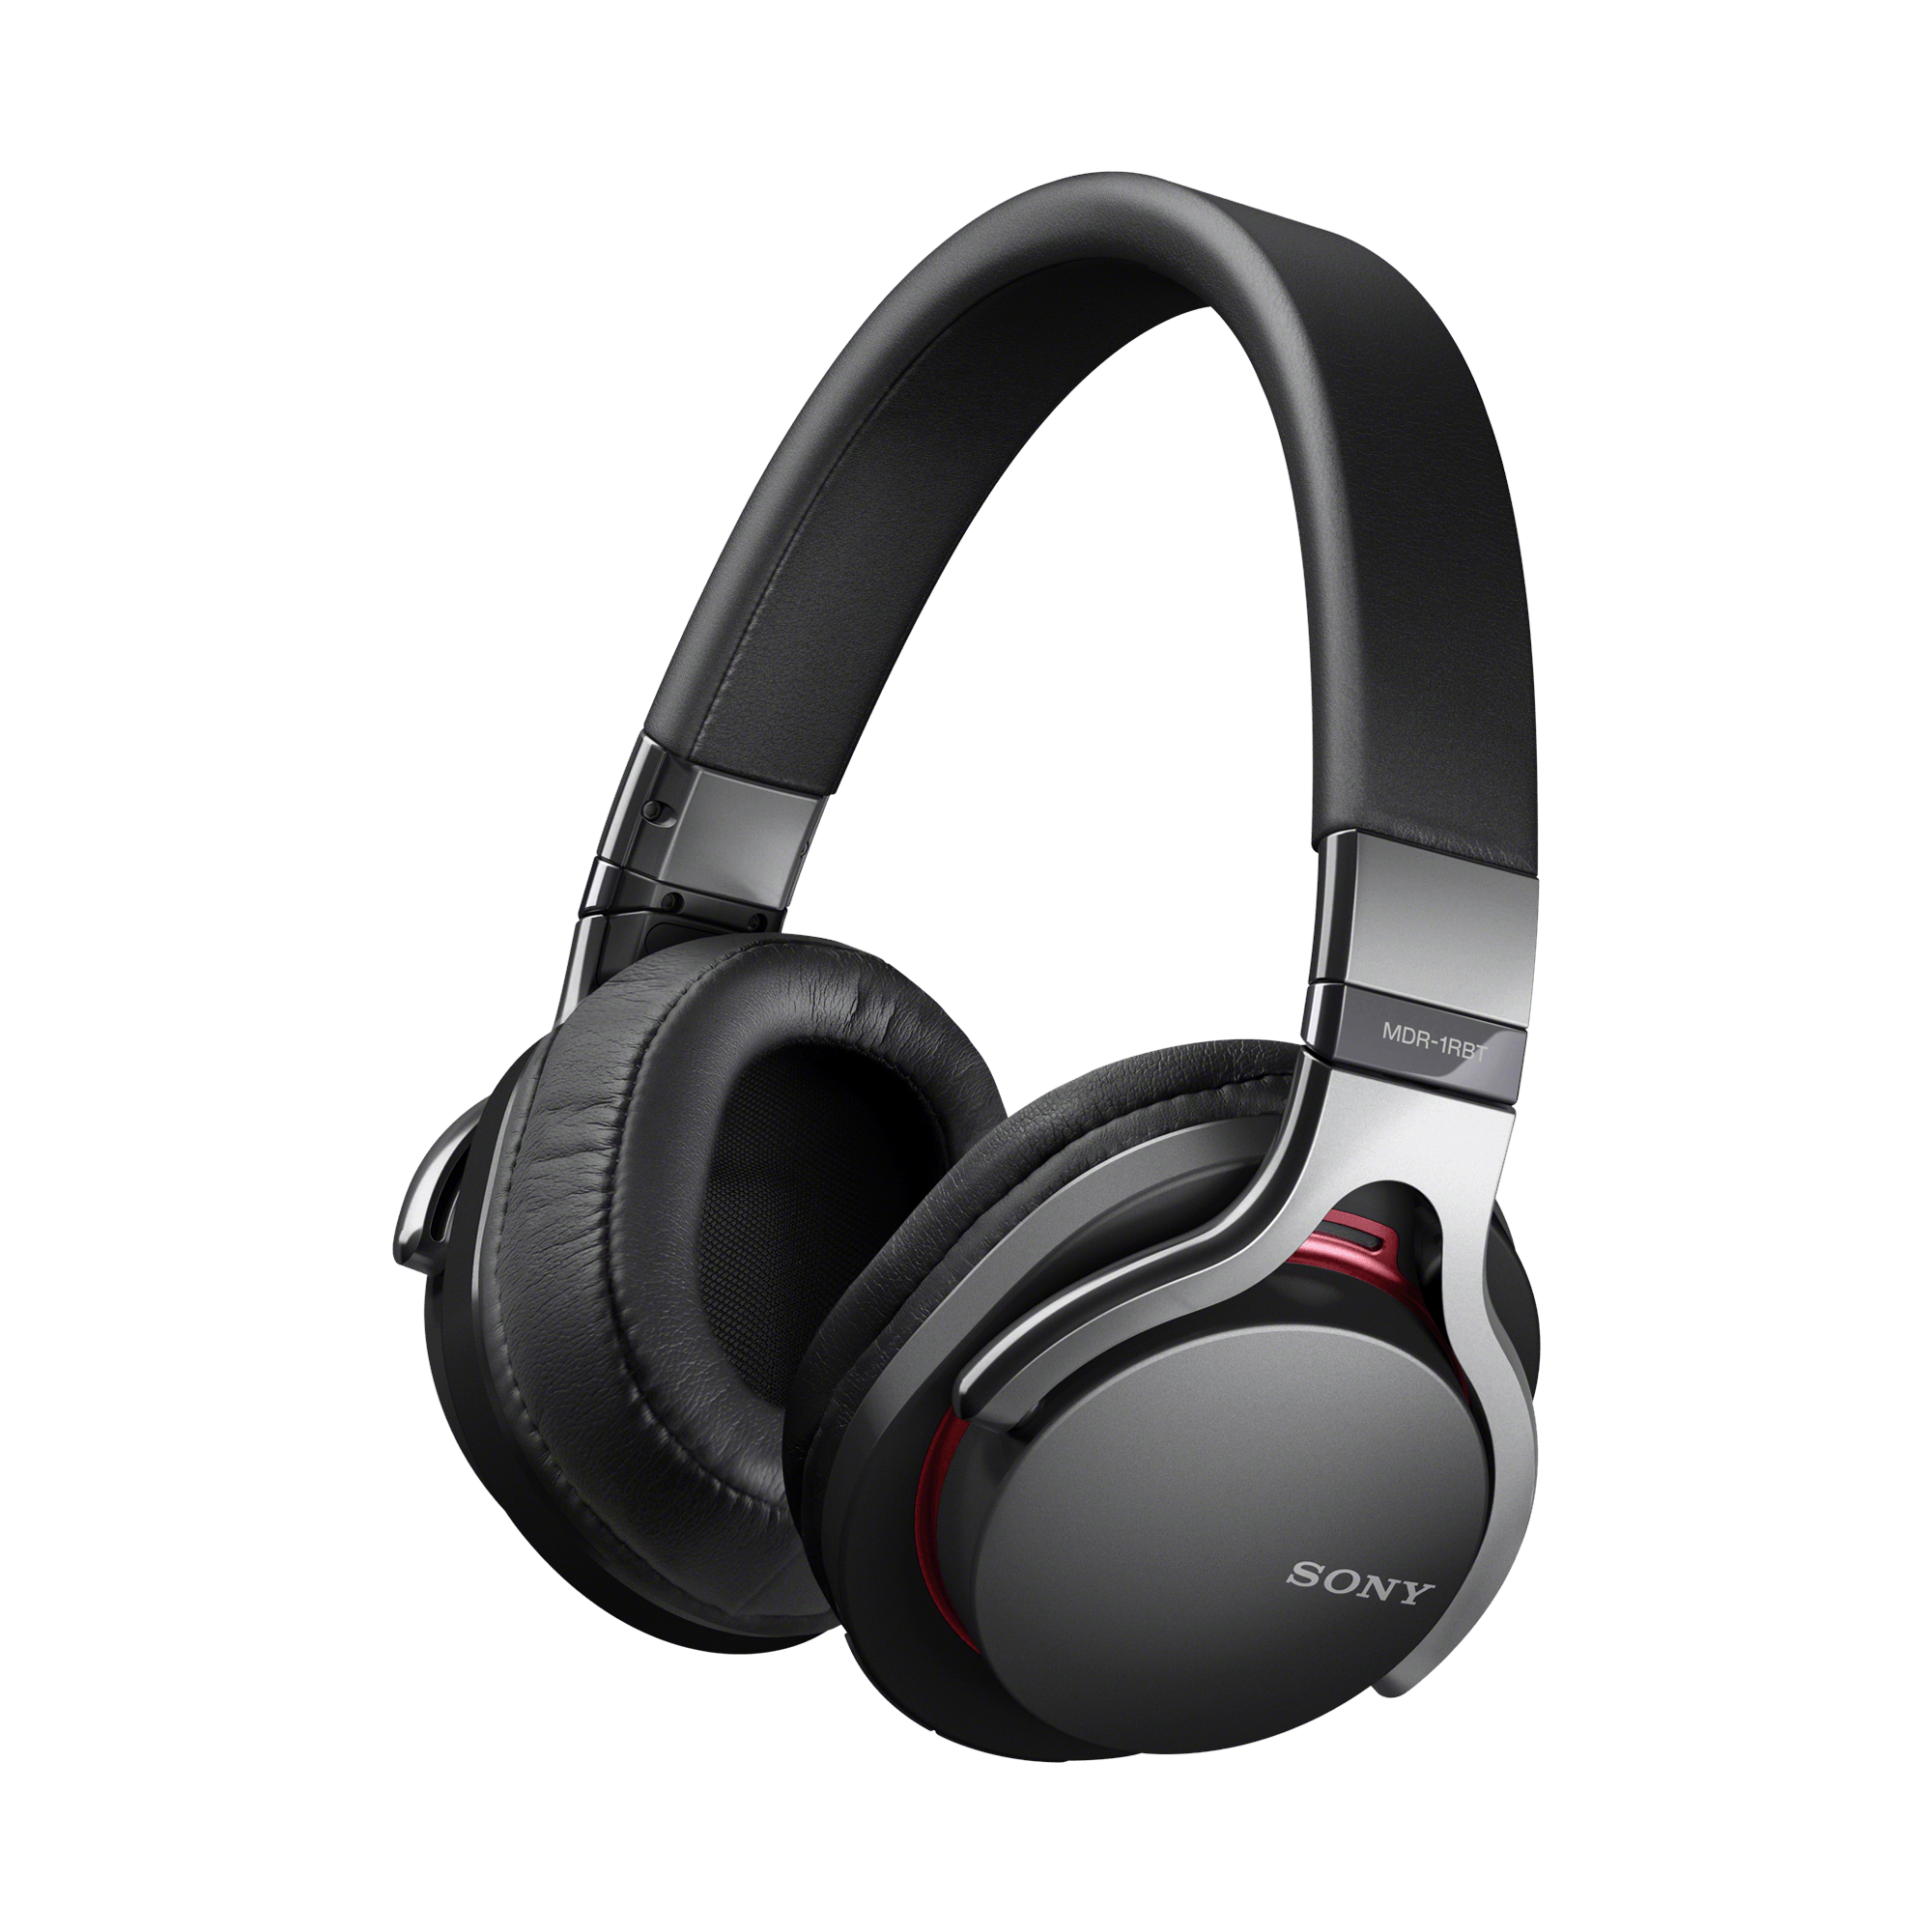 Wireless Headphones PNG Image Transparent Background